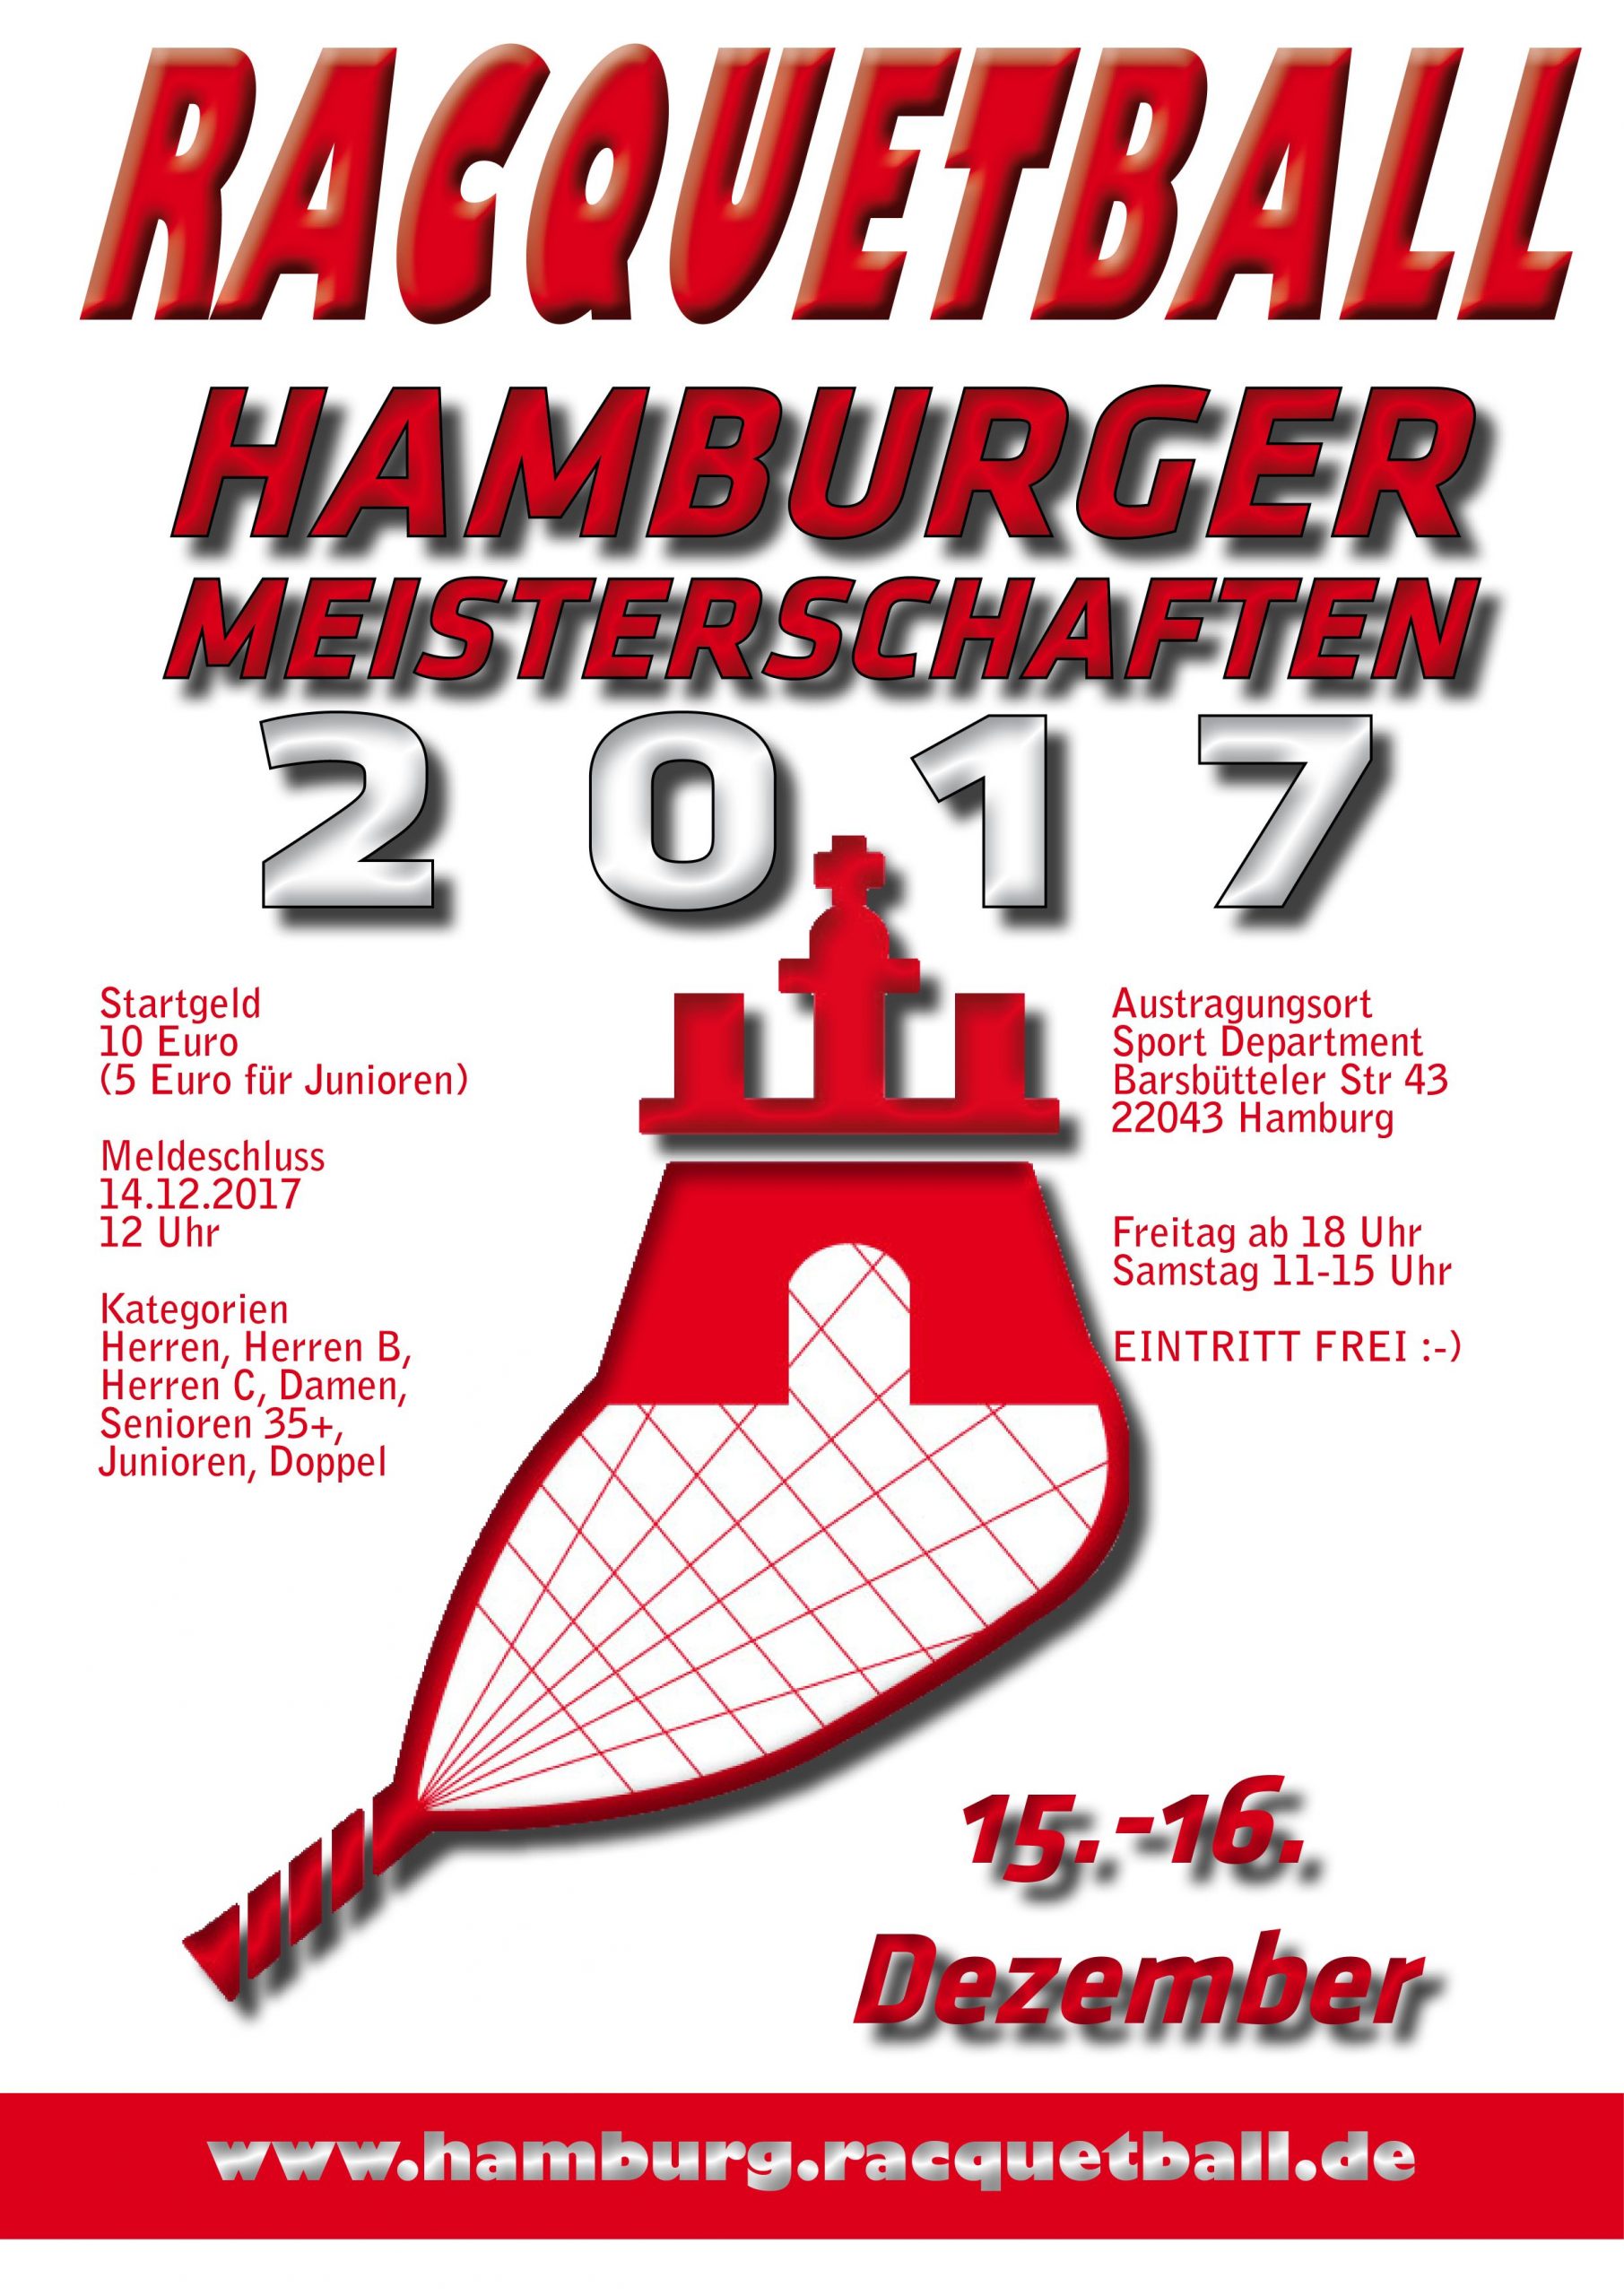 You are currently viewing Hamburger Meisterschaften 2017